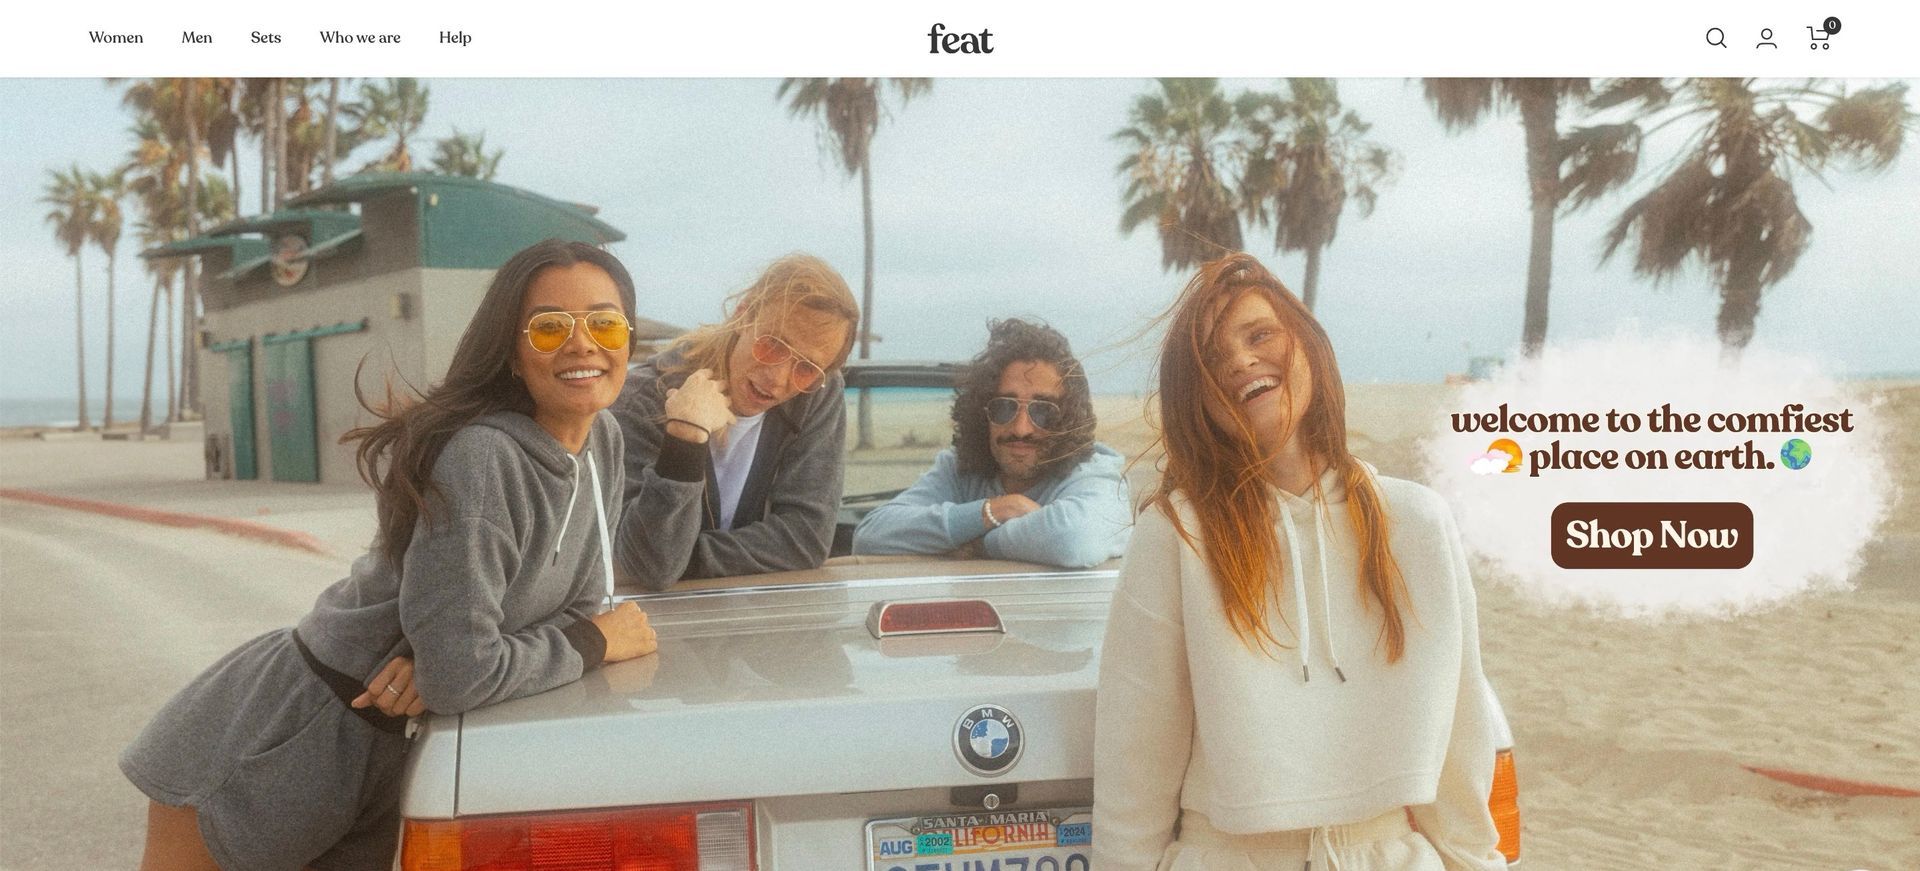 A screenshot of Feat's homepage shows a group of people standing next to a car on a beach with a CTA calling 